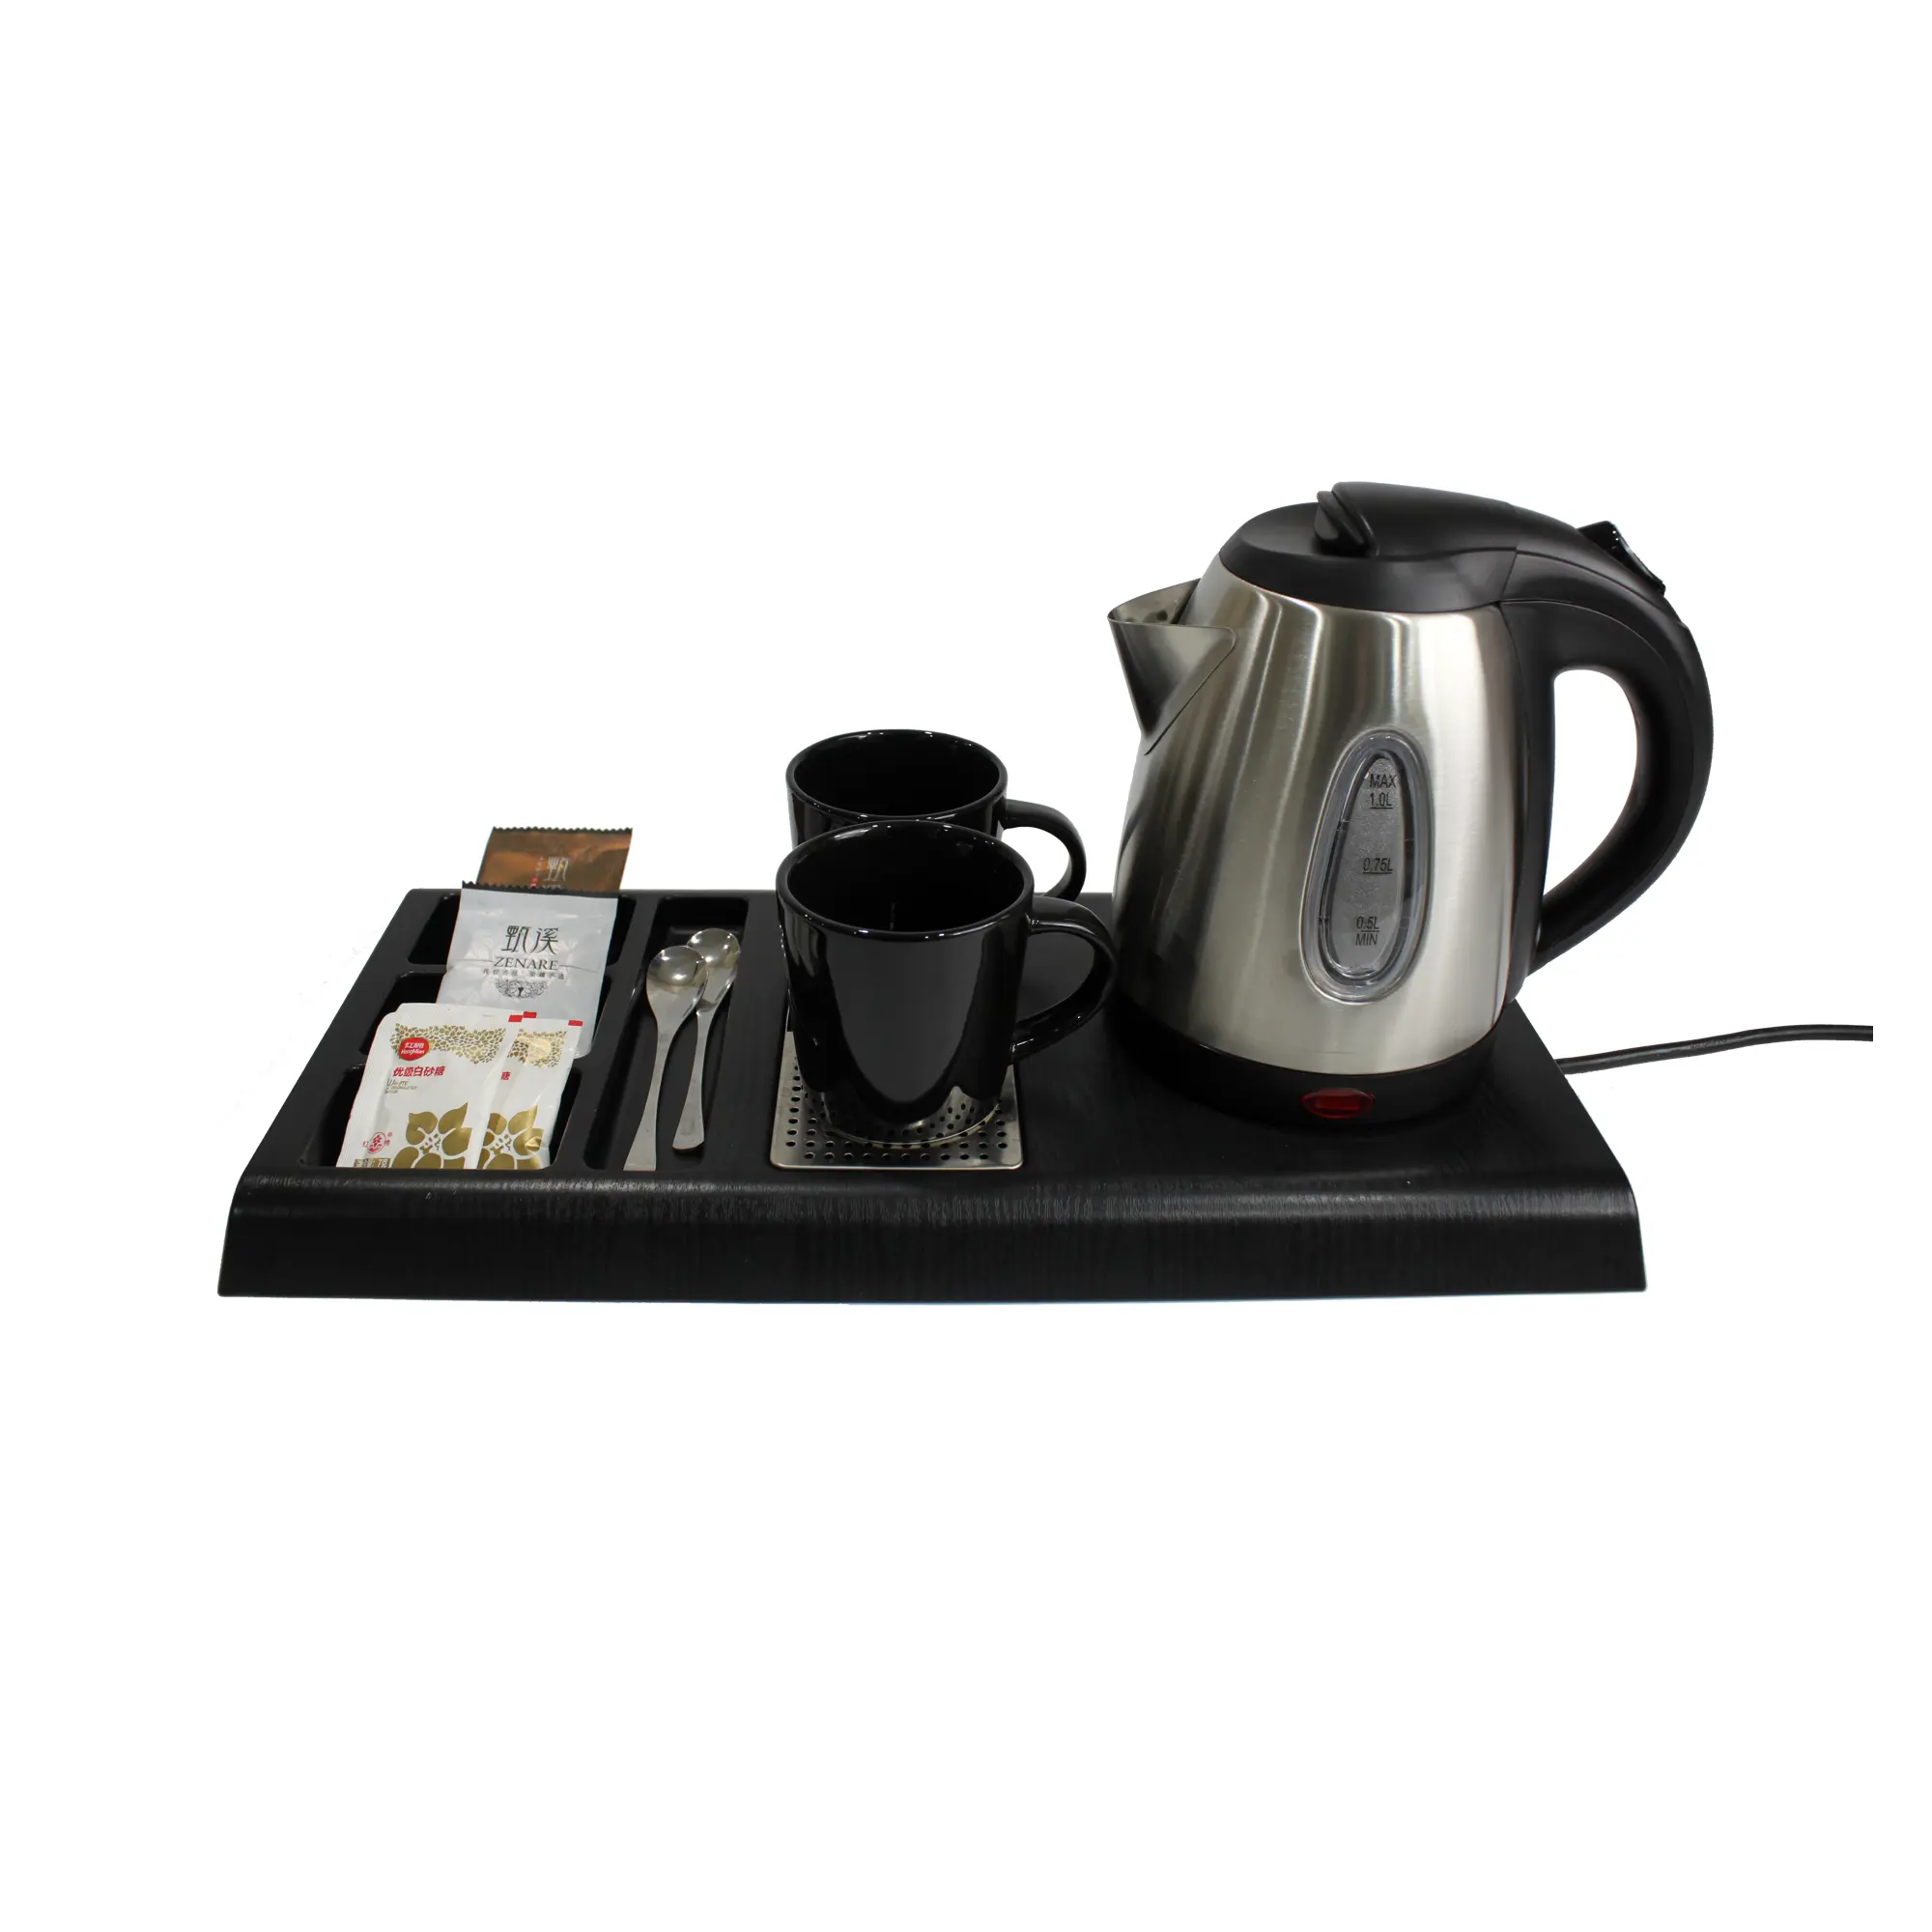 Top Quality hotel room tea kettle set tray with coffee maker and kettles with electric Supplier from China USWT-S01